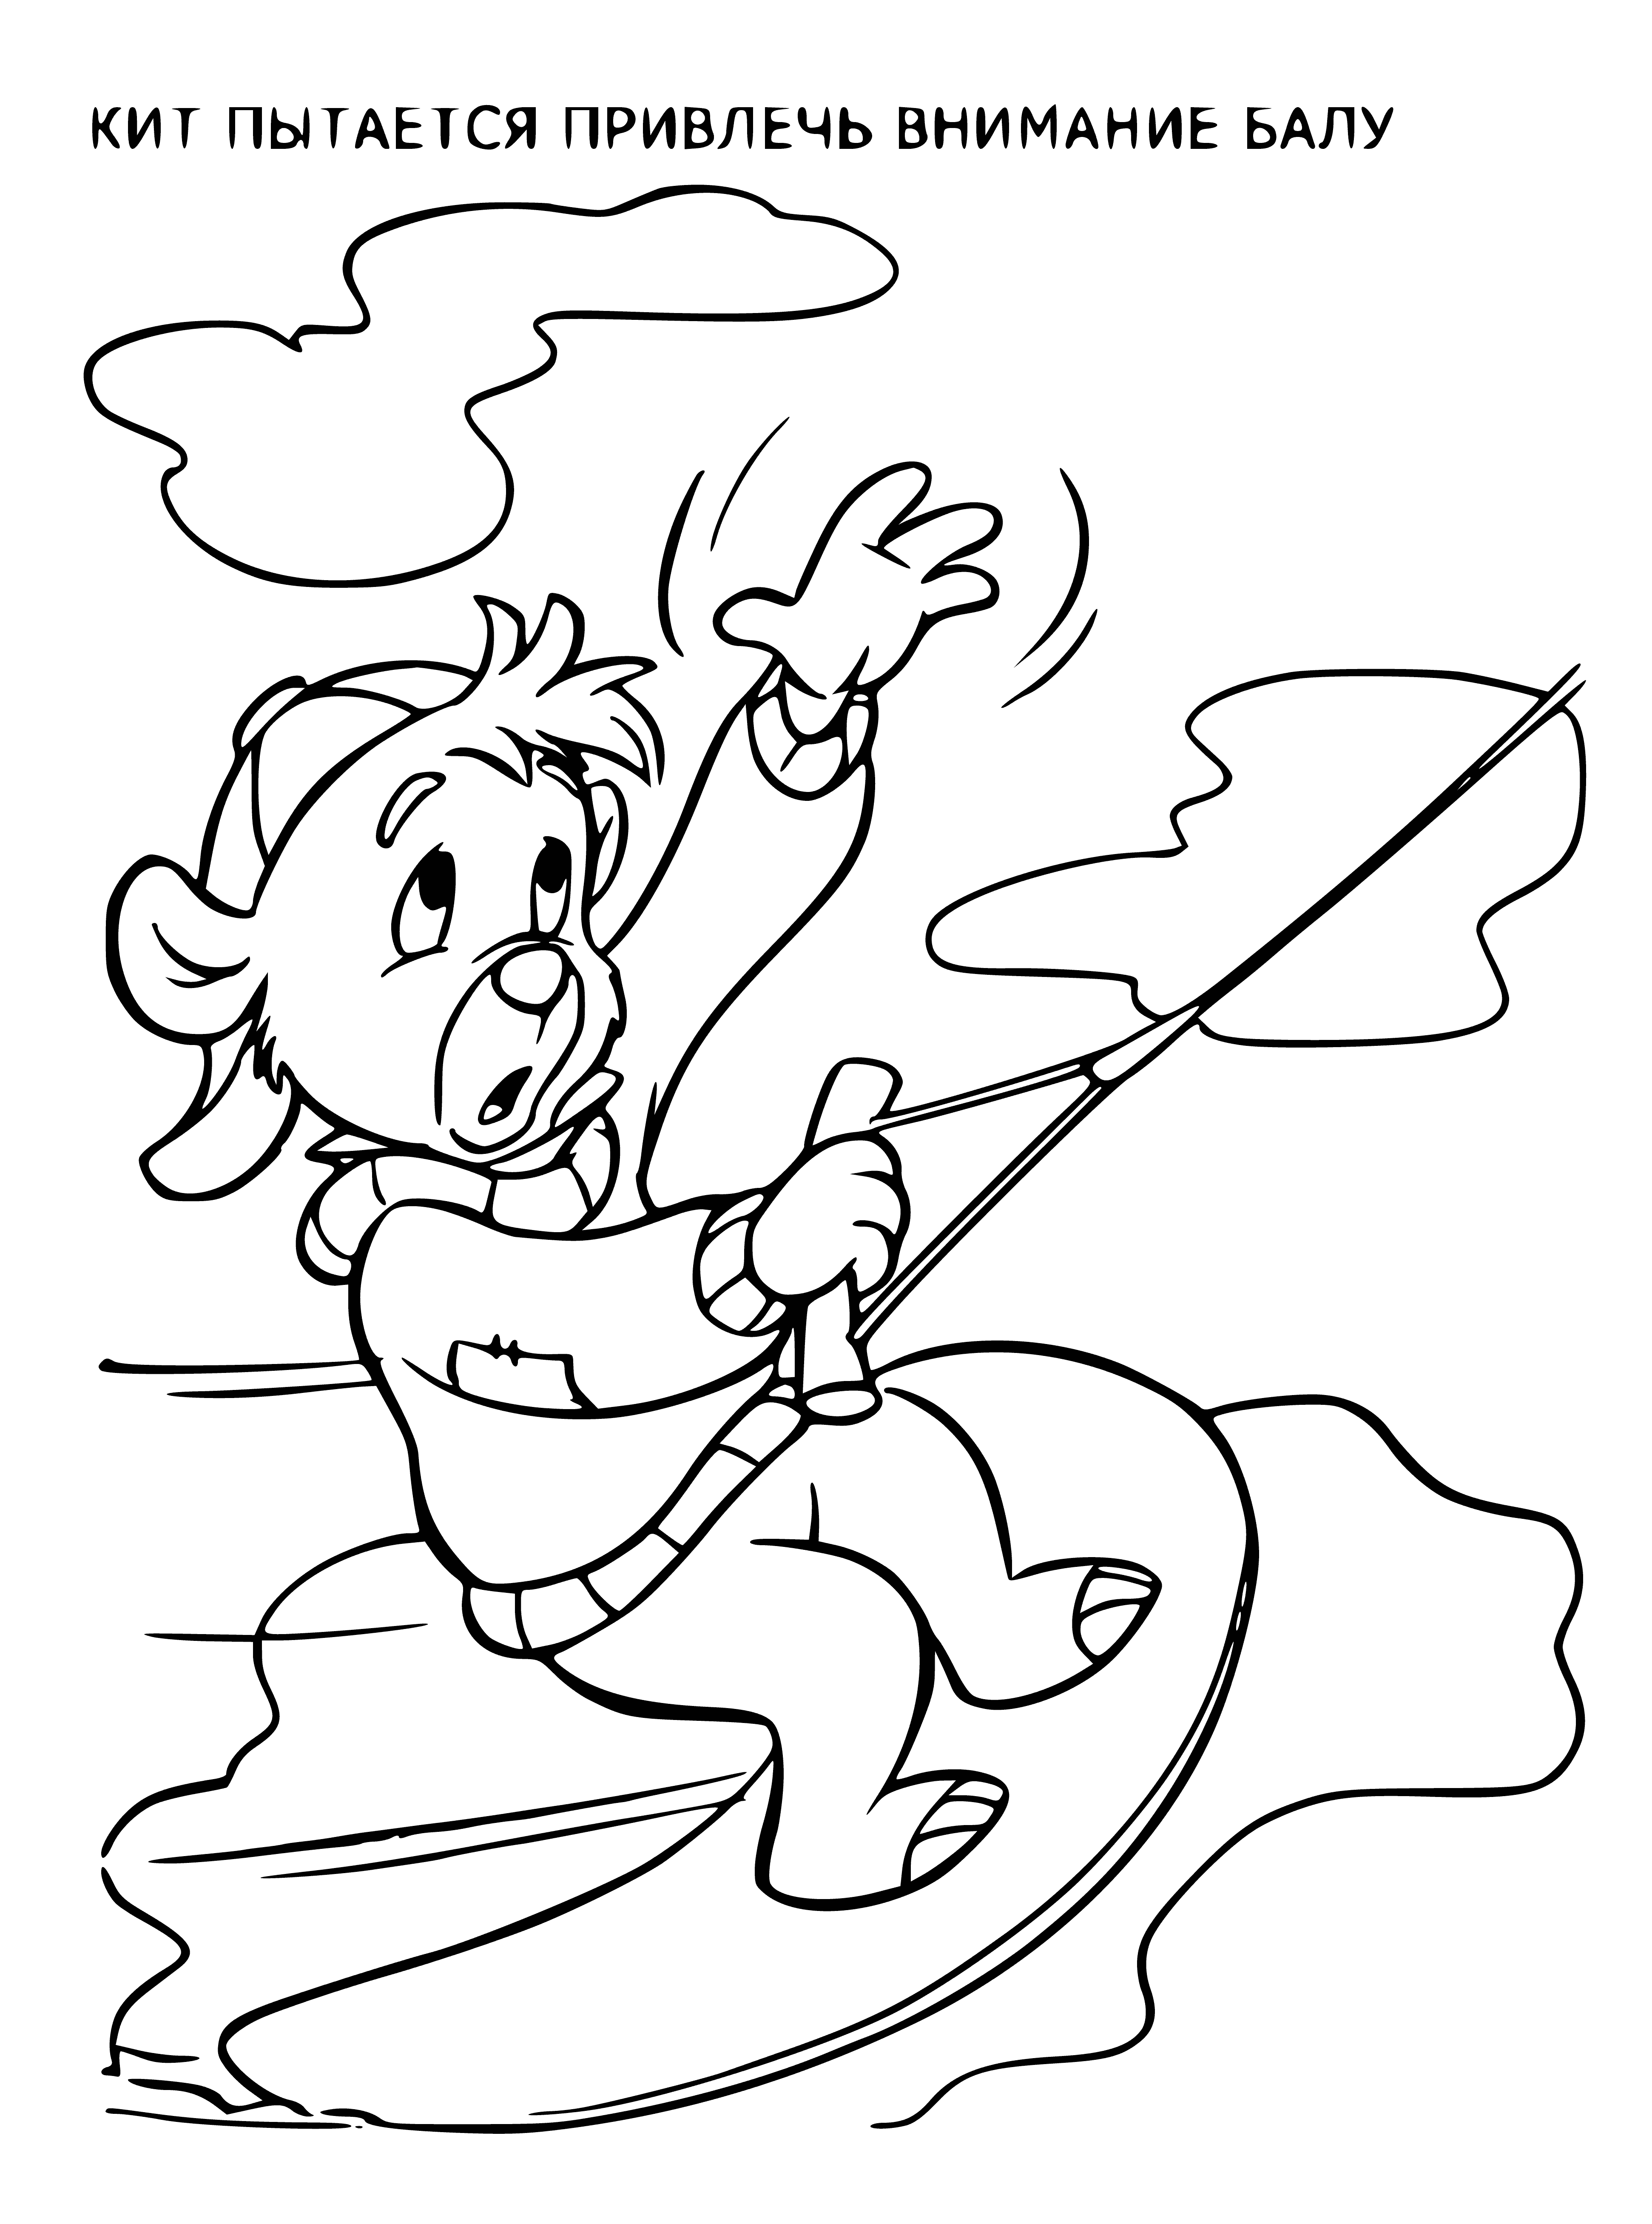 coloring page: Gray whale with mouth open leans right, white object beside it.